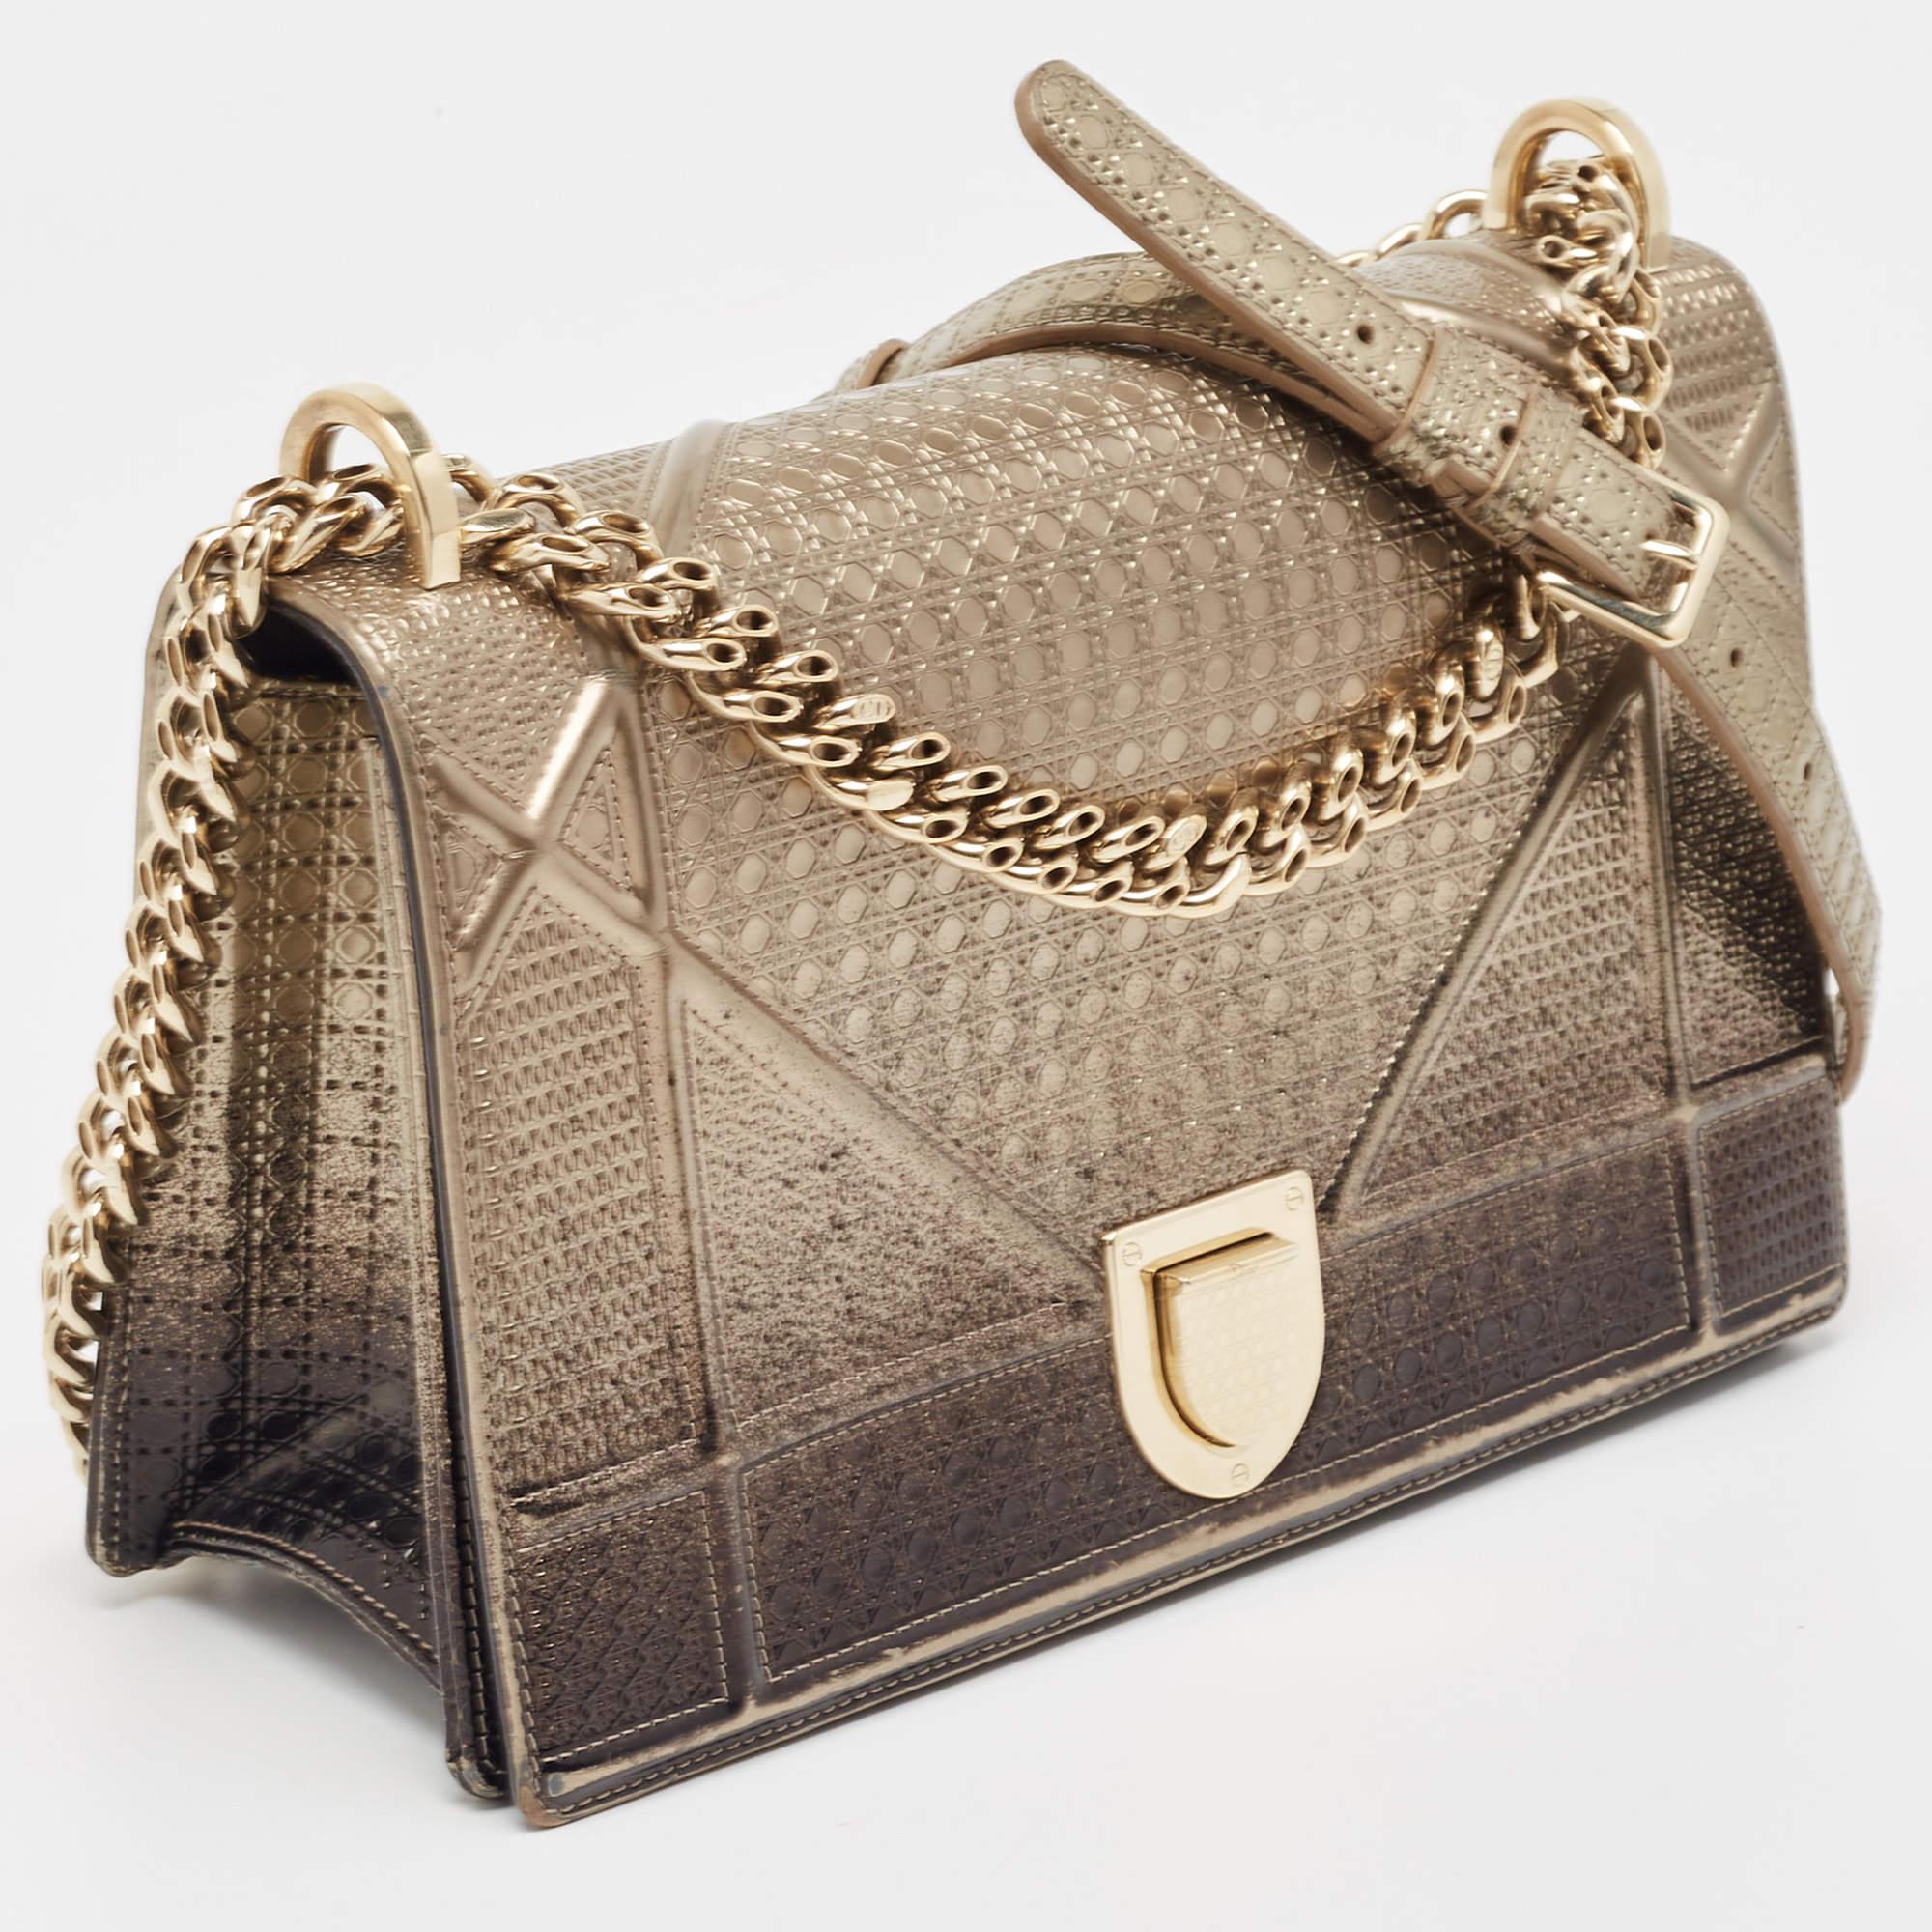 Introduced in Spring/Summer 2015 runaway, the Diorama embodies refined construction and celebrates femininity through its artistic design. The signature Cannage pattern brings out the appeal of this Dior bag. Made from patent leather, the